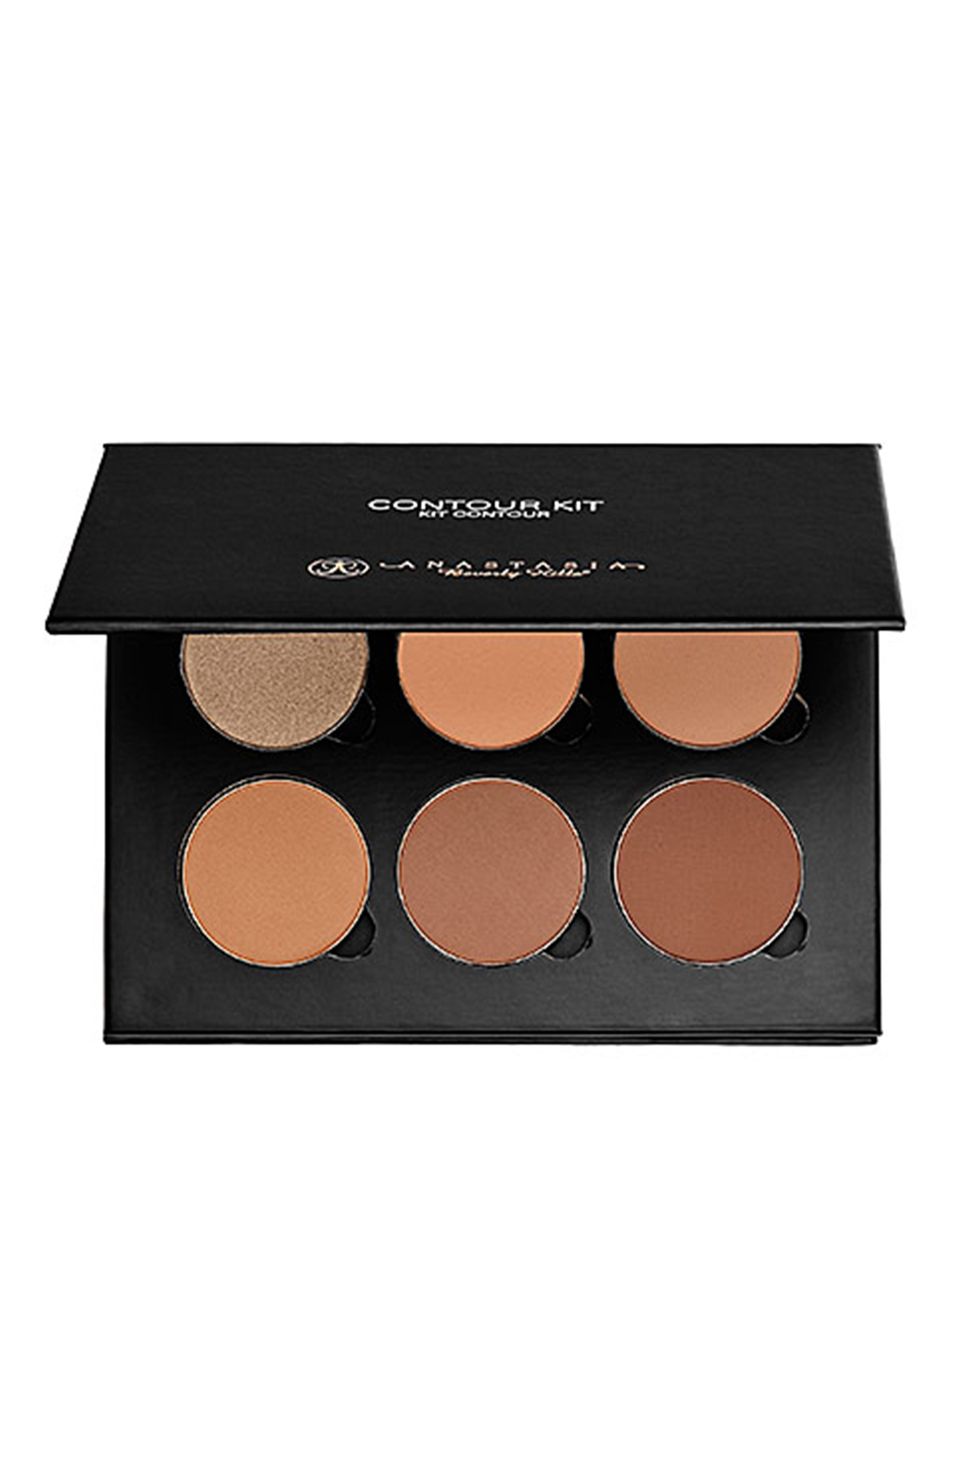 <p>For Sir John, whose clients include Beyoncé and Joan Smalls, it's all about shade range when it comes to contouring. "Anastasia of Beverly Hills Contour Kit is probably one of the most popular and has the greatest range in shades which makes it easy for anyone to use; whether they be from Harlem or Hong Kong," he says.</p><p>Anastasia Beverly Hills Contour Kit, $40, <u data-redactor-tag="u"><a href="http://www.sephora.com/contour-kit-P386335?skuId=1658830">Sephora.com</a></u></p>